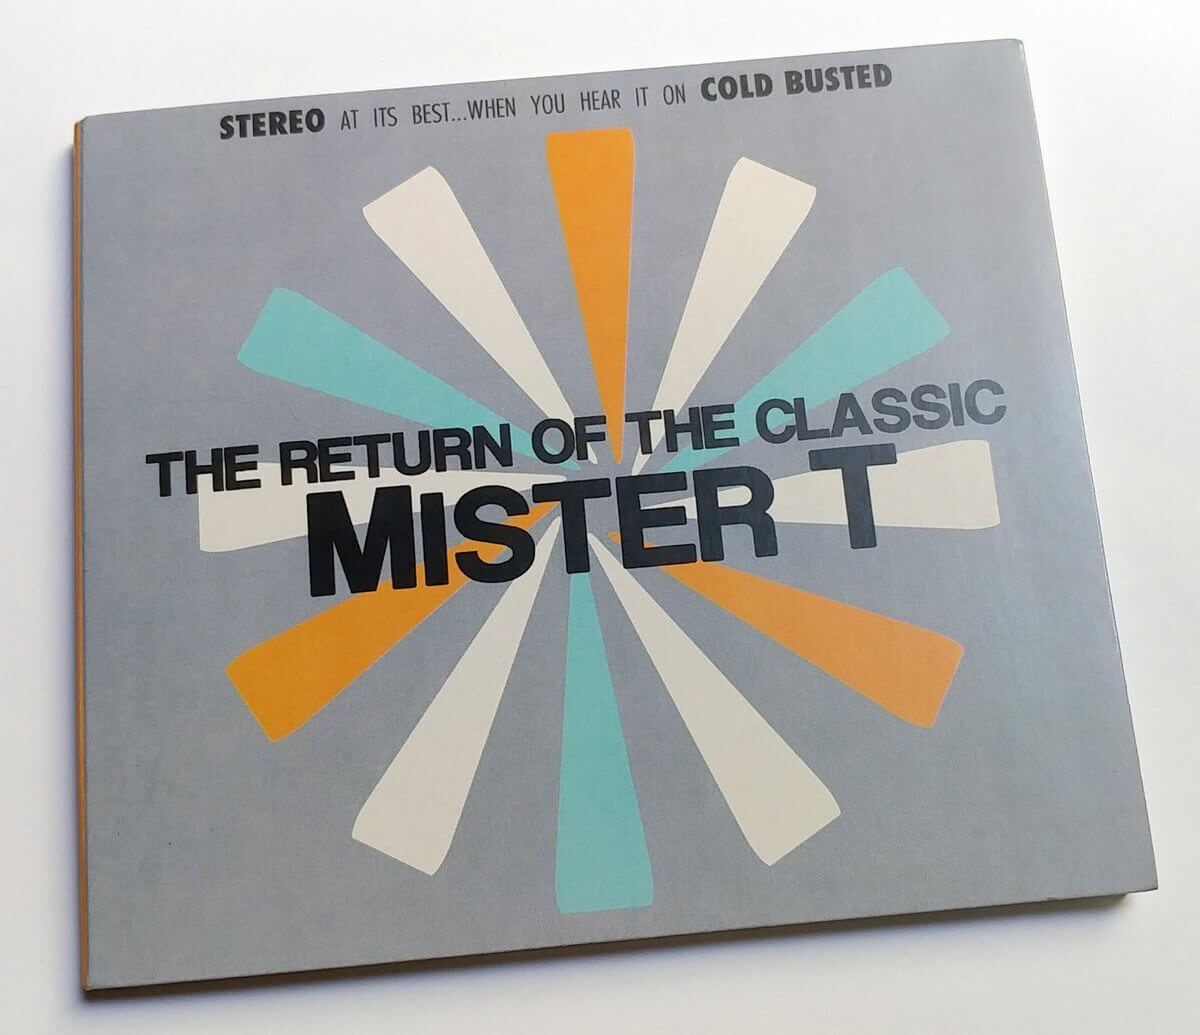 Mister T. - The Return Of The Classic - Limited Edition Compact Disc - Cold Busted